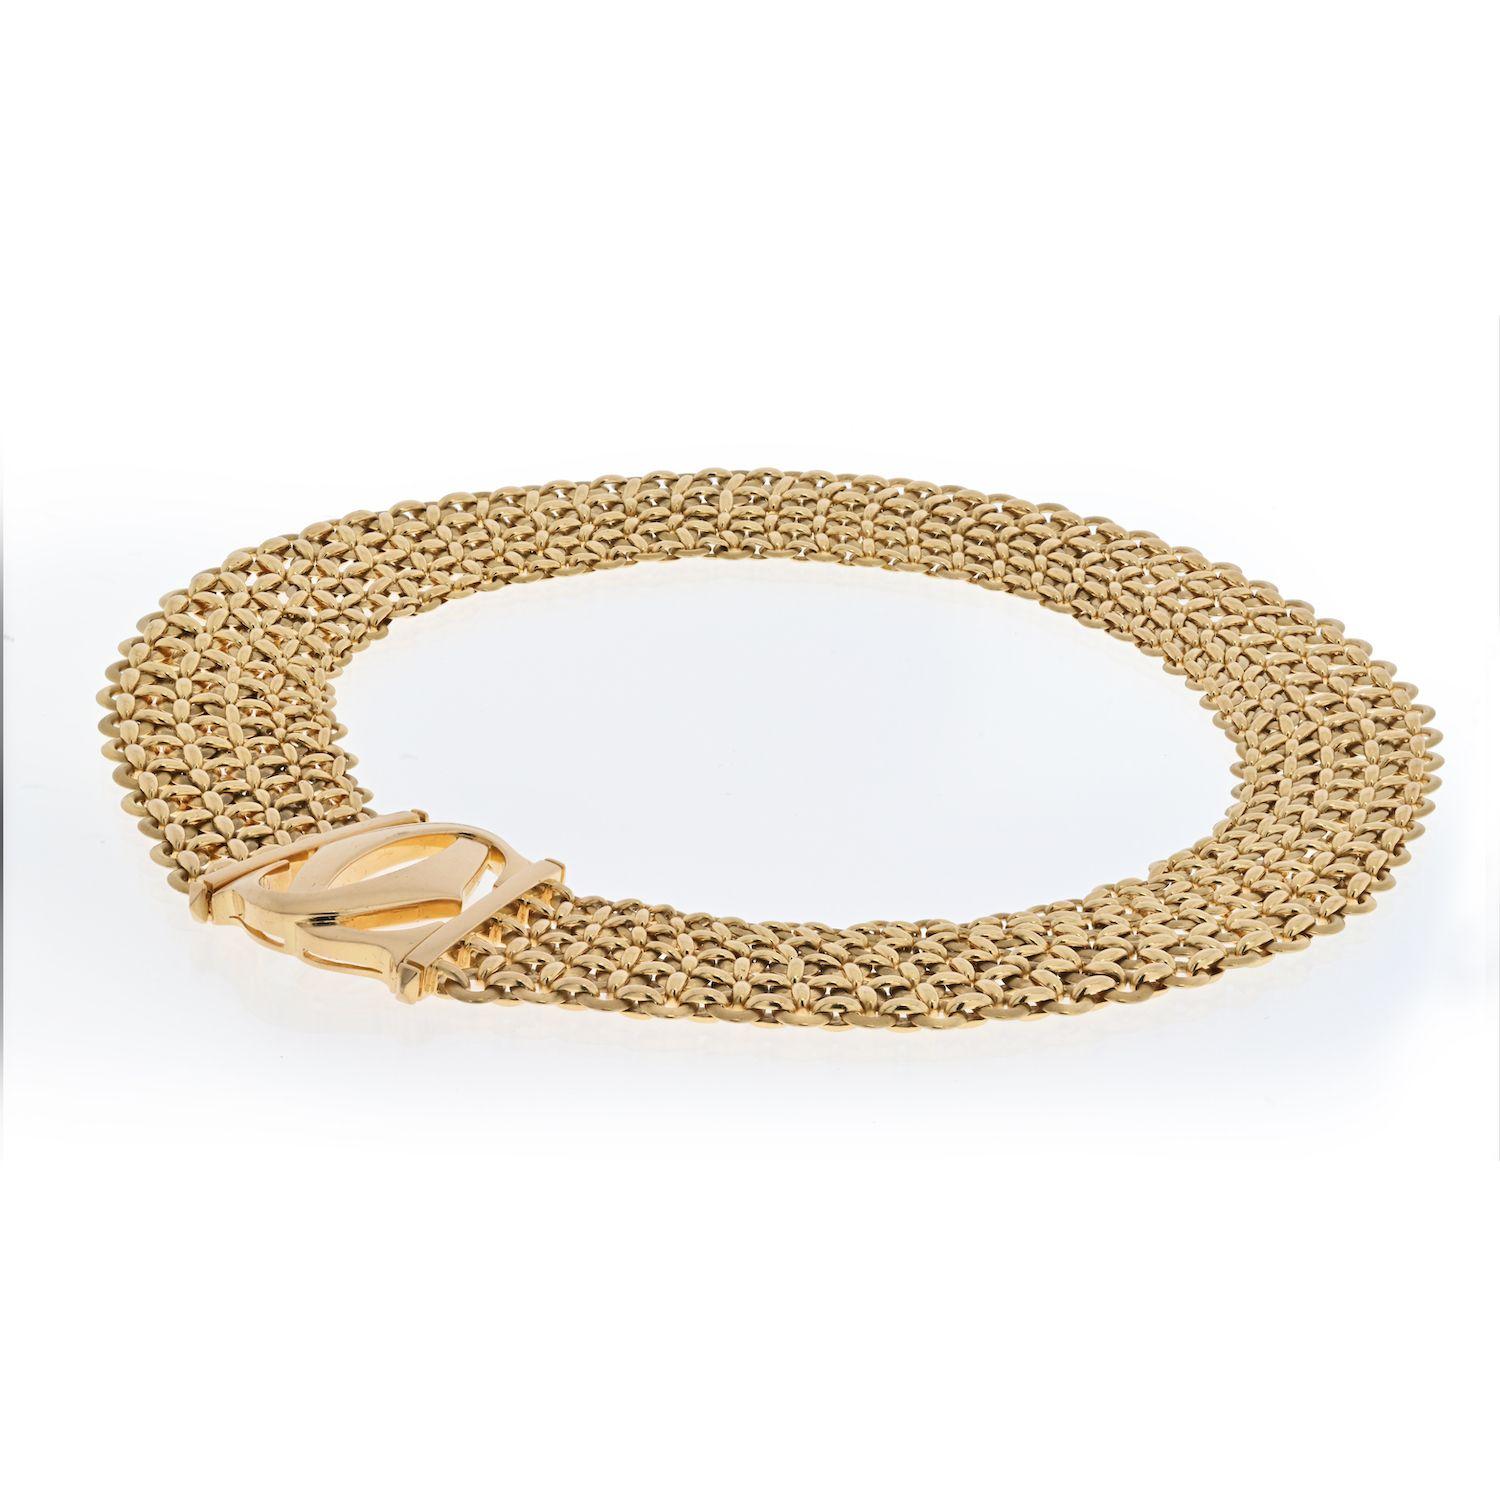 Vintage staple by Cartier 18K Yellow Gold, it is from the Double C Penelope collection, made with three rows of gold links, fits like a collar necklace. Chic and elegant.
Length: 16 inches.
Width: 20mm Double C width: 24mm
207 grams. 